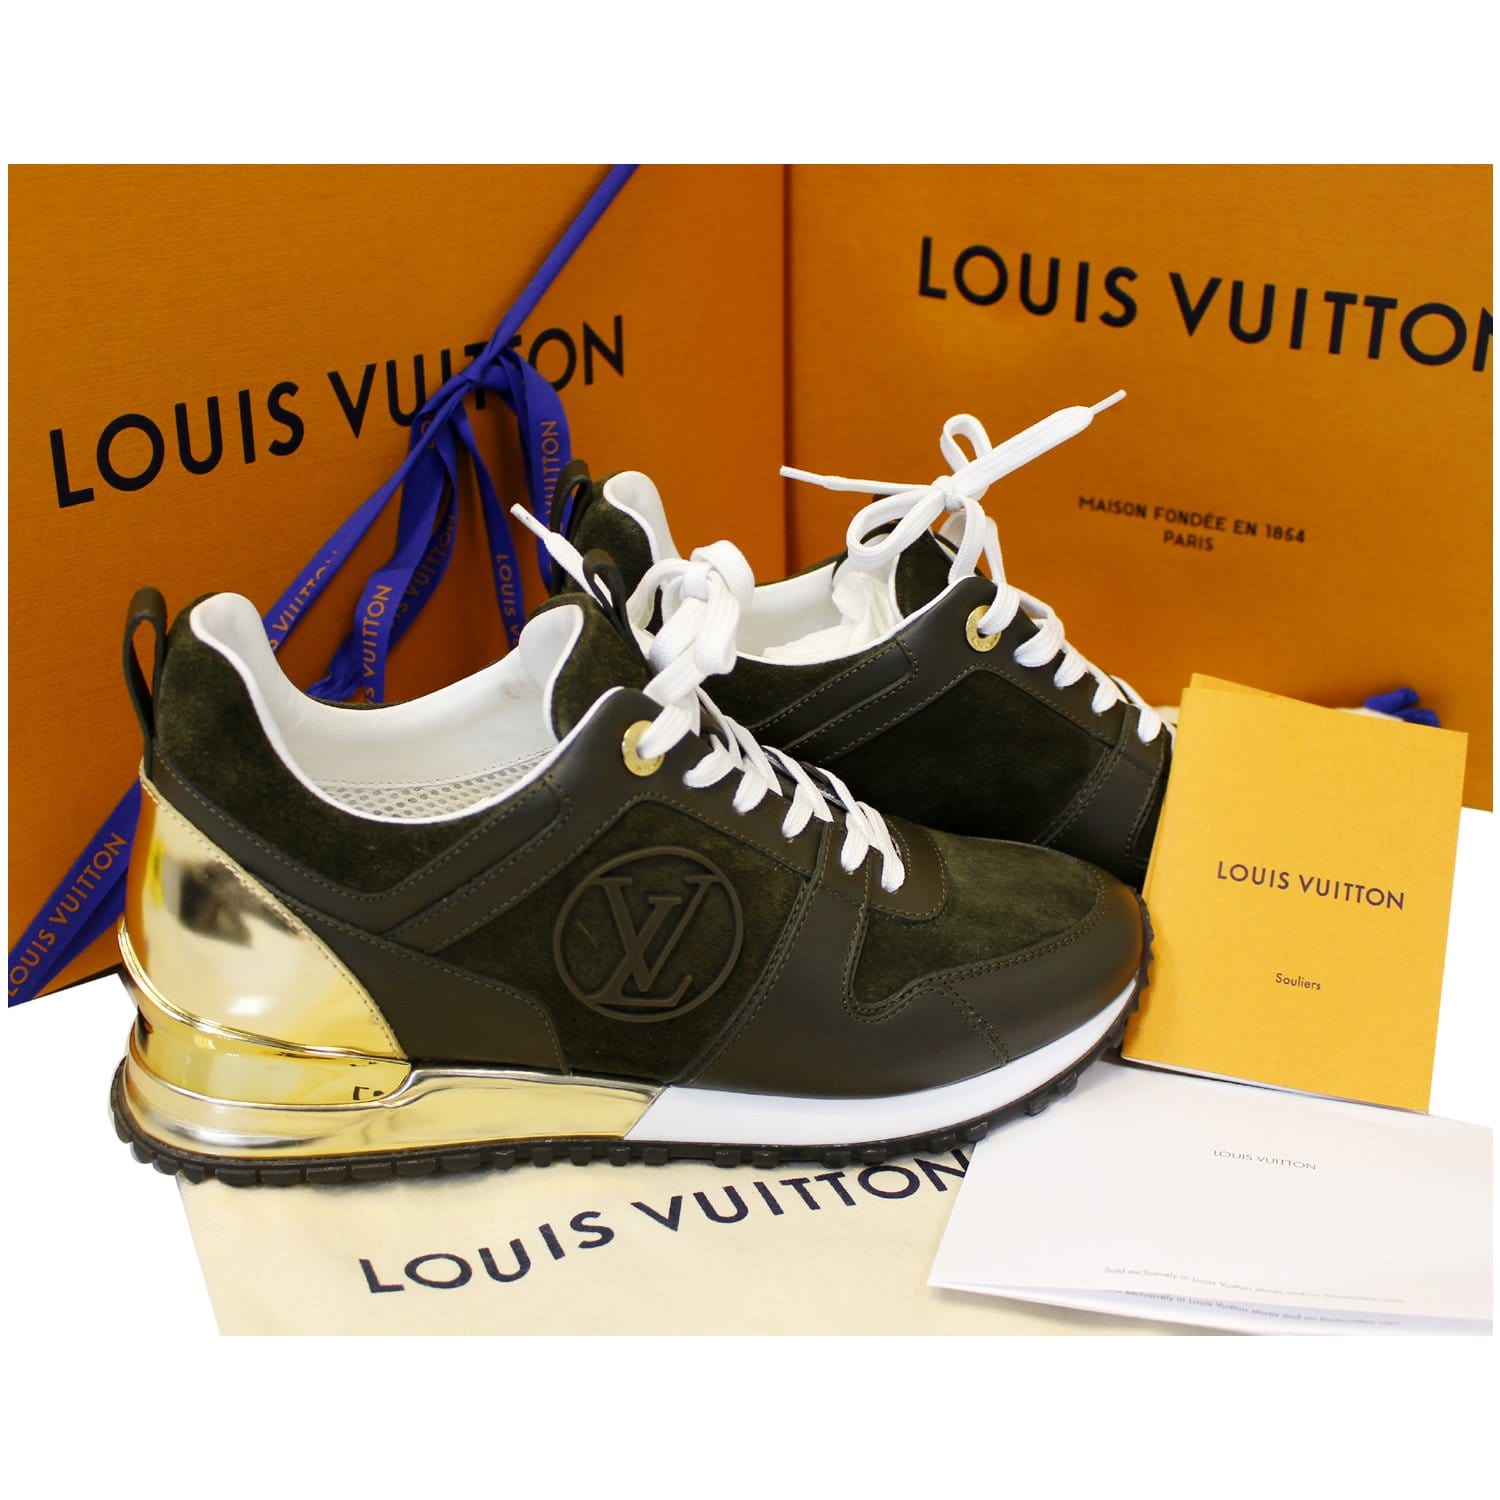 Run away leather trainers Louis Vuitton Beige size 37.5 EU in Leather -  23549989